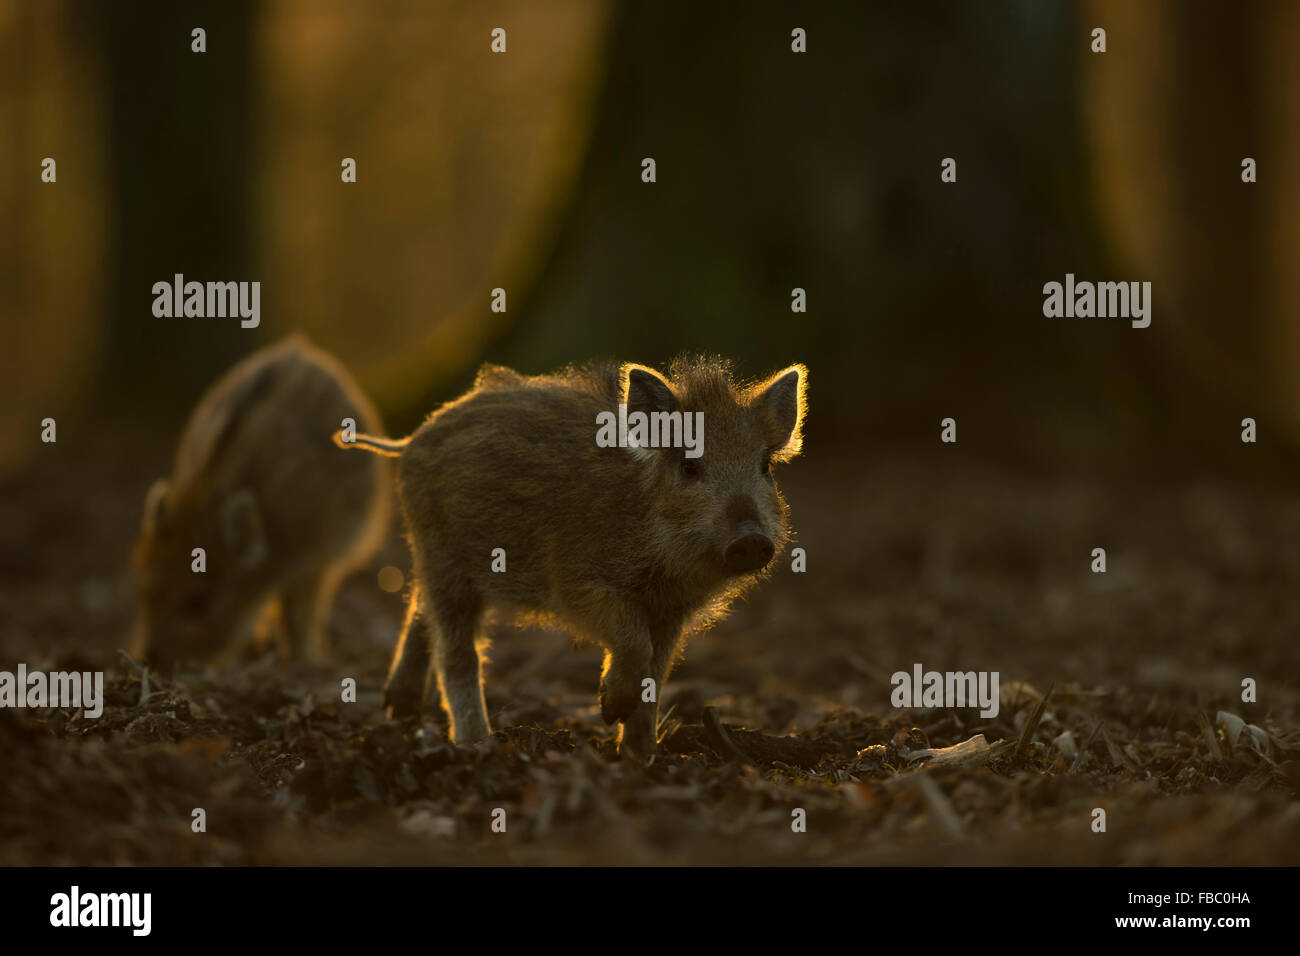 Piglets of Wild boar / Wild hog / Feral pig / Wildschwein ( Sus scrofa ) searching for food under trees, backlight situation. Stock Photo